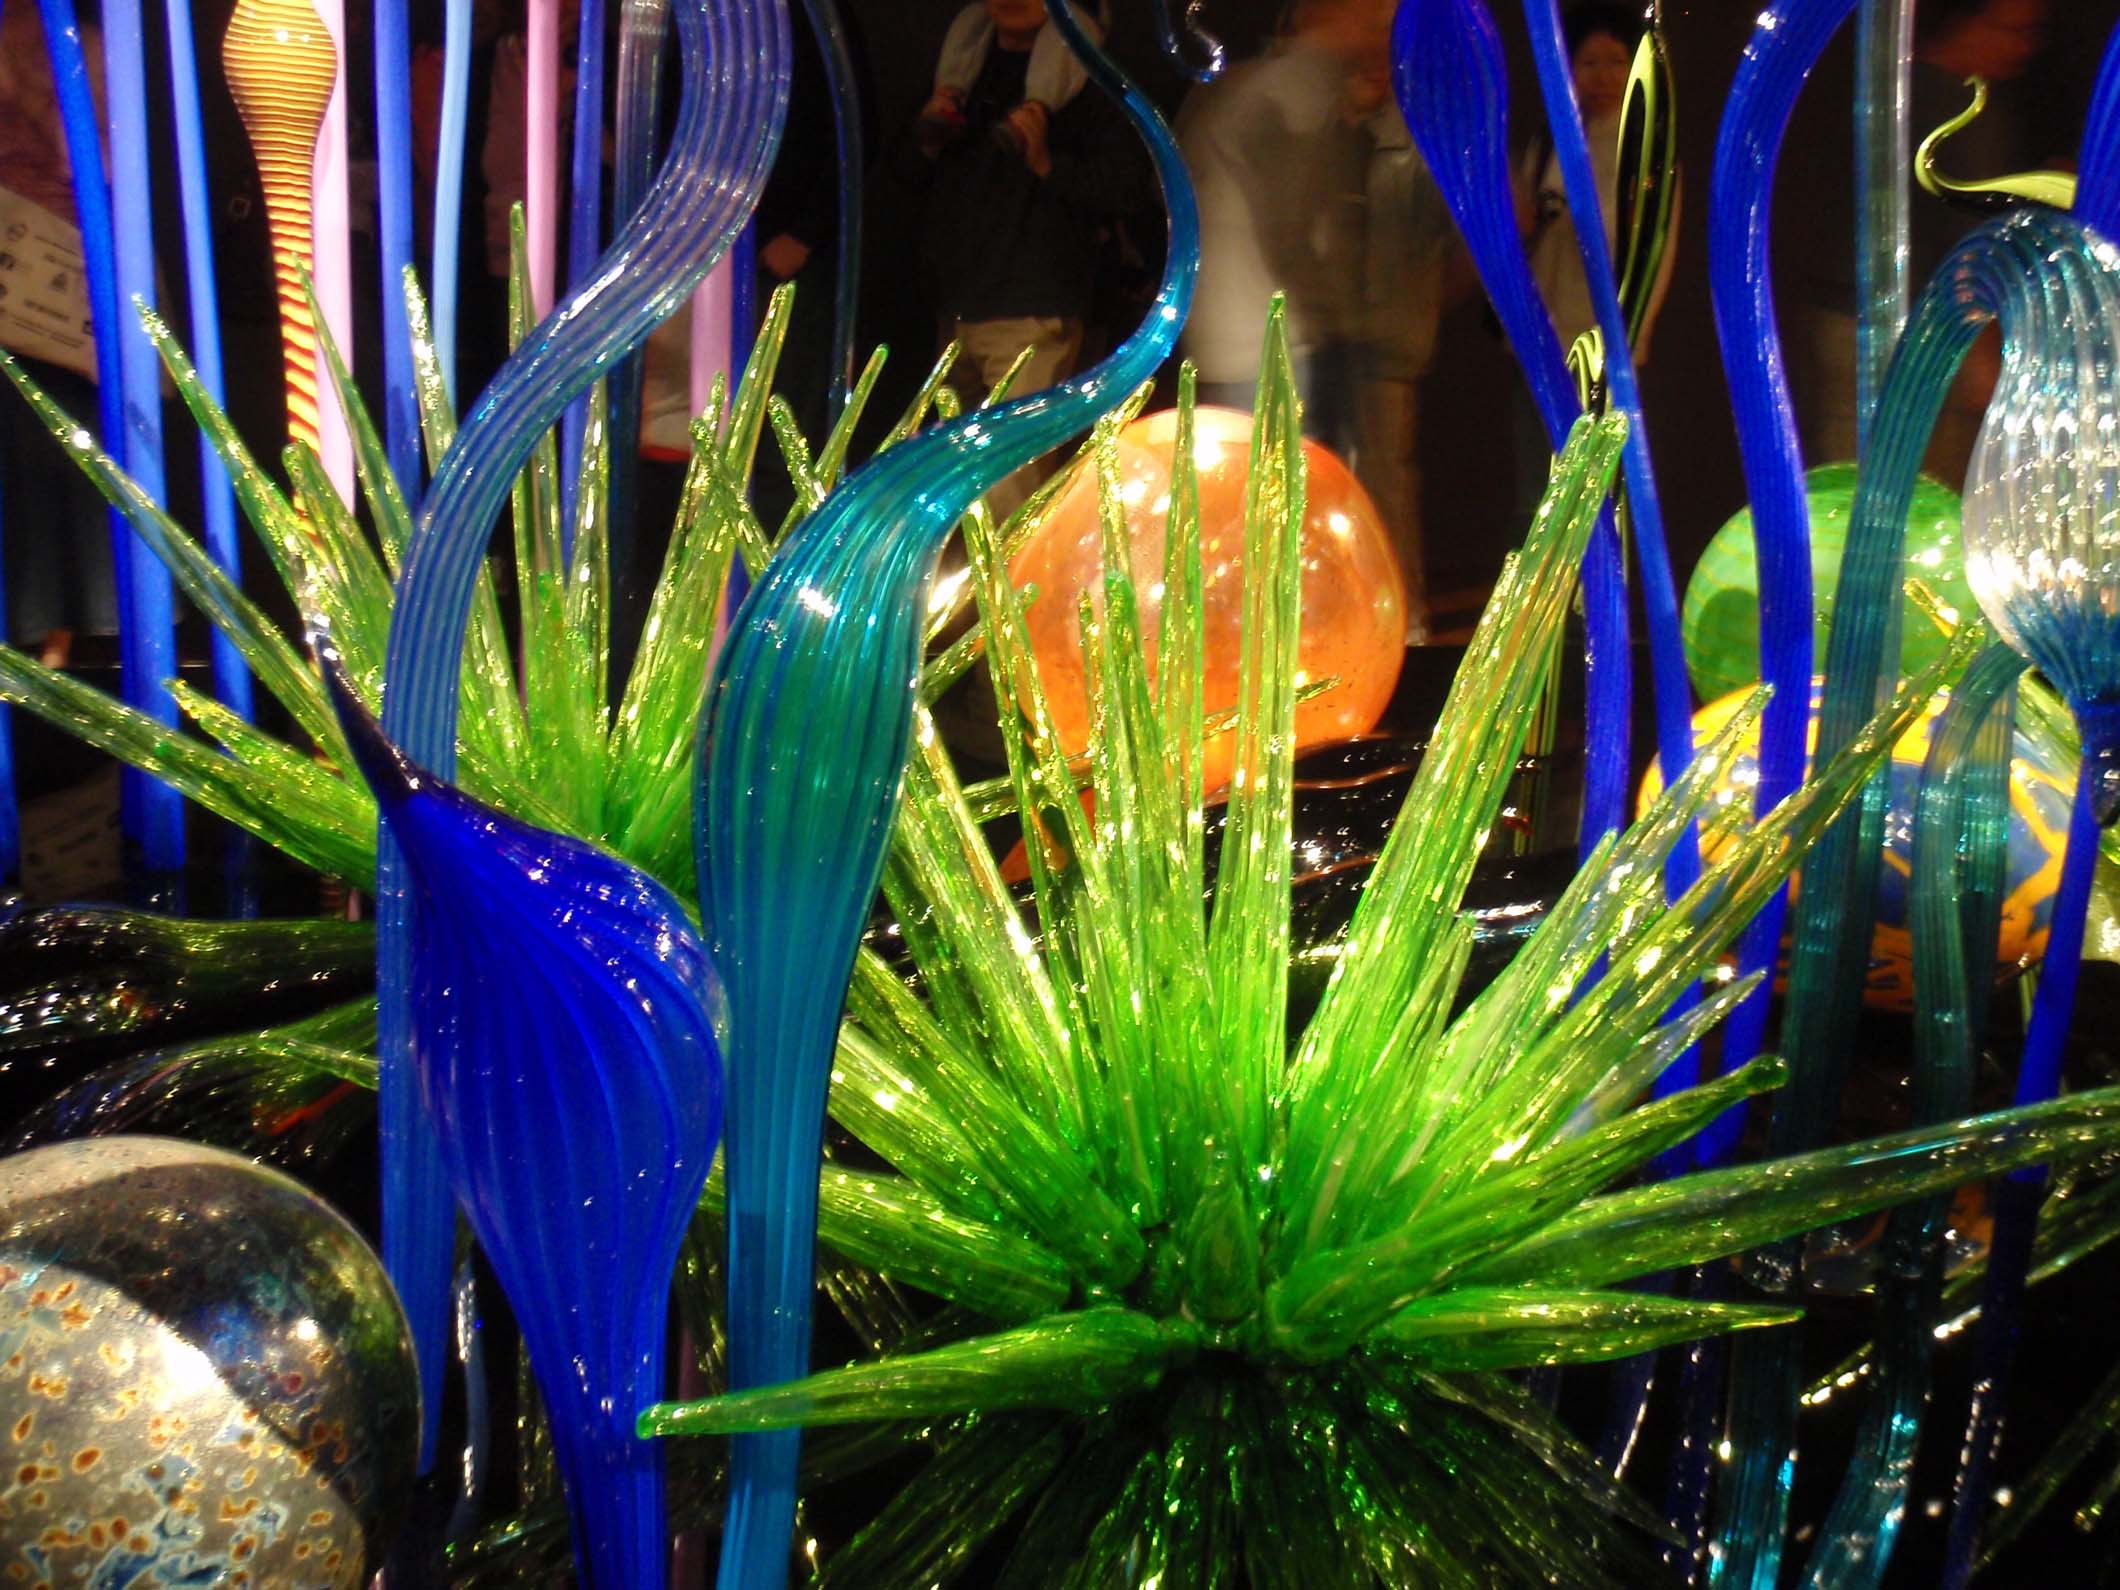 Chihuly Garden